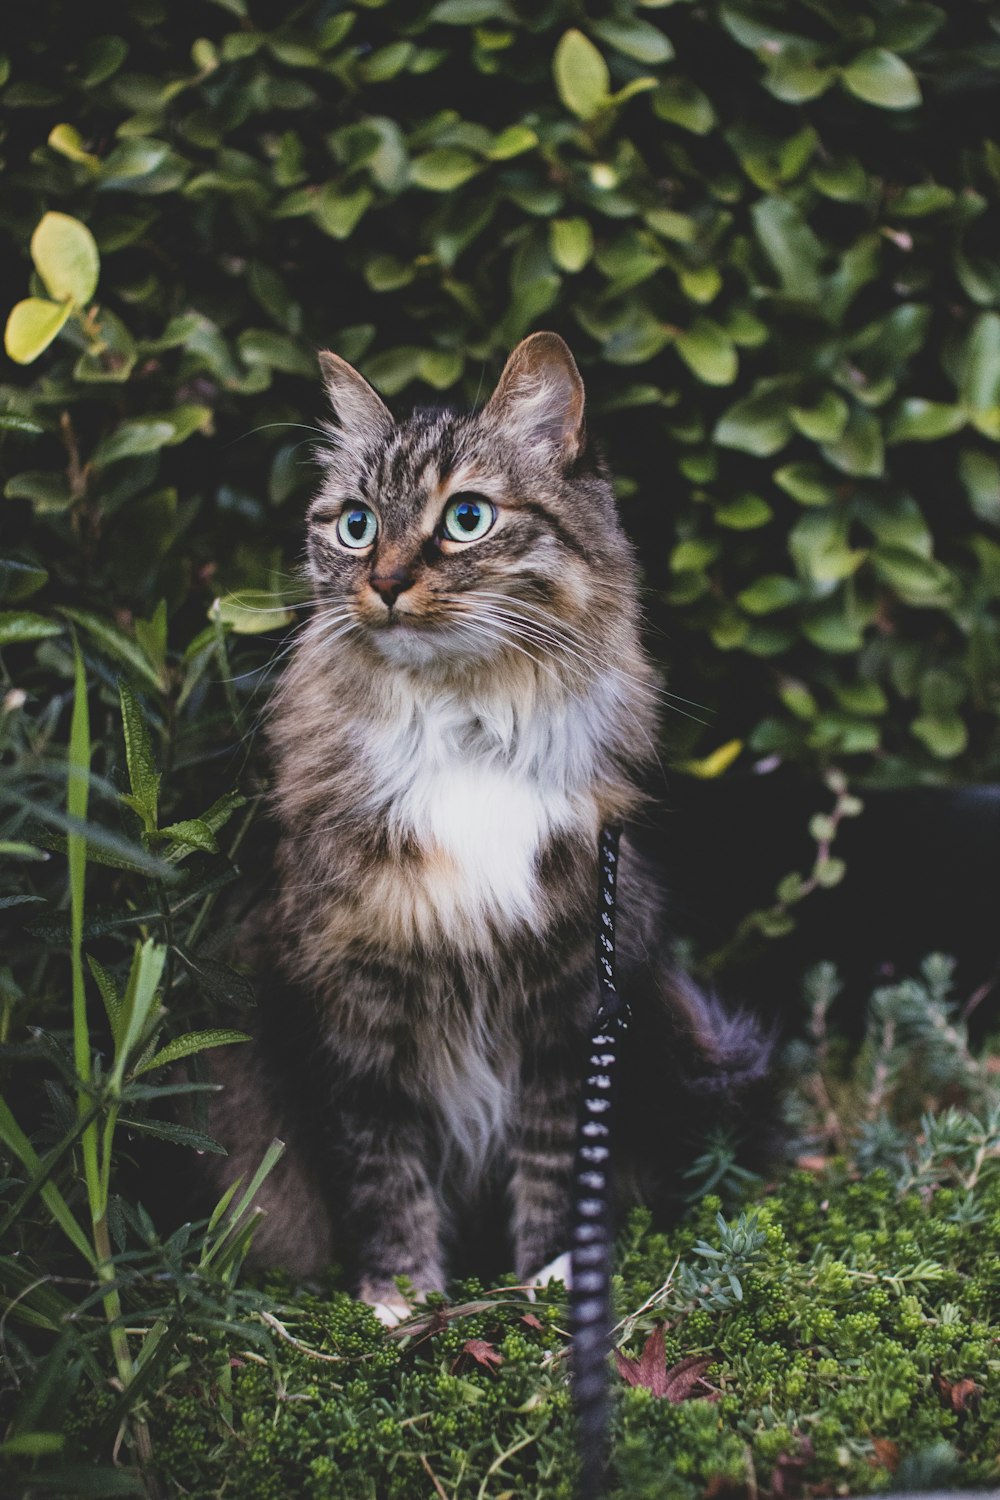 a cat sitting in the grass with a leash